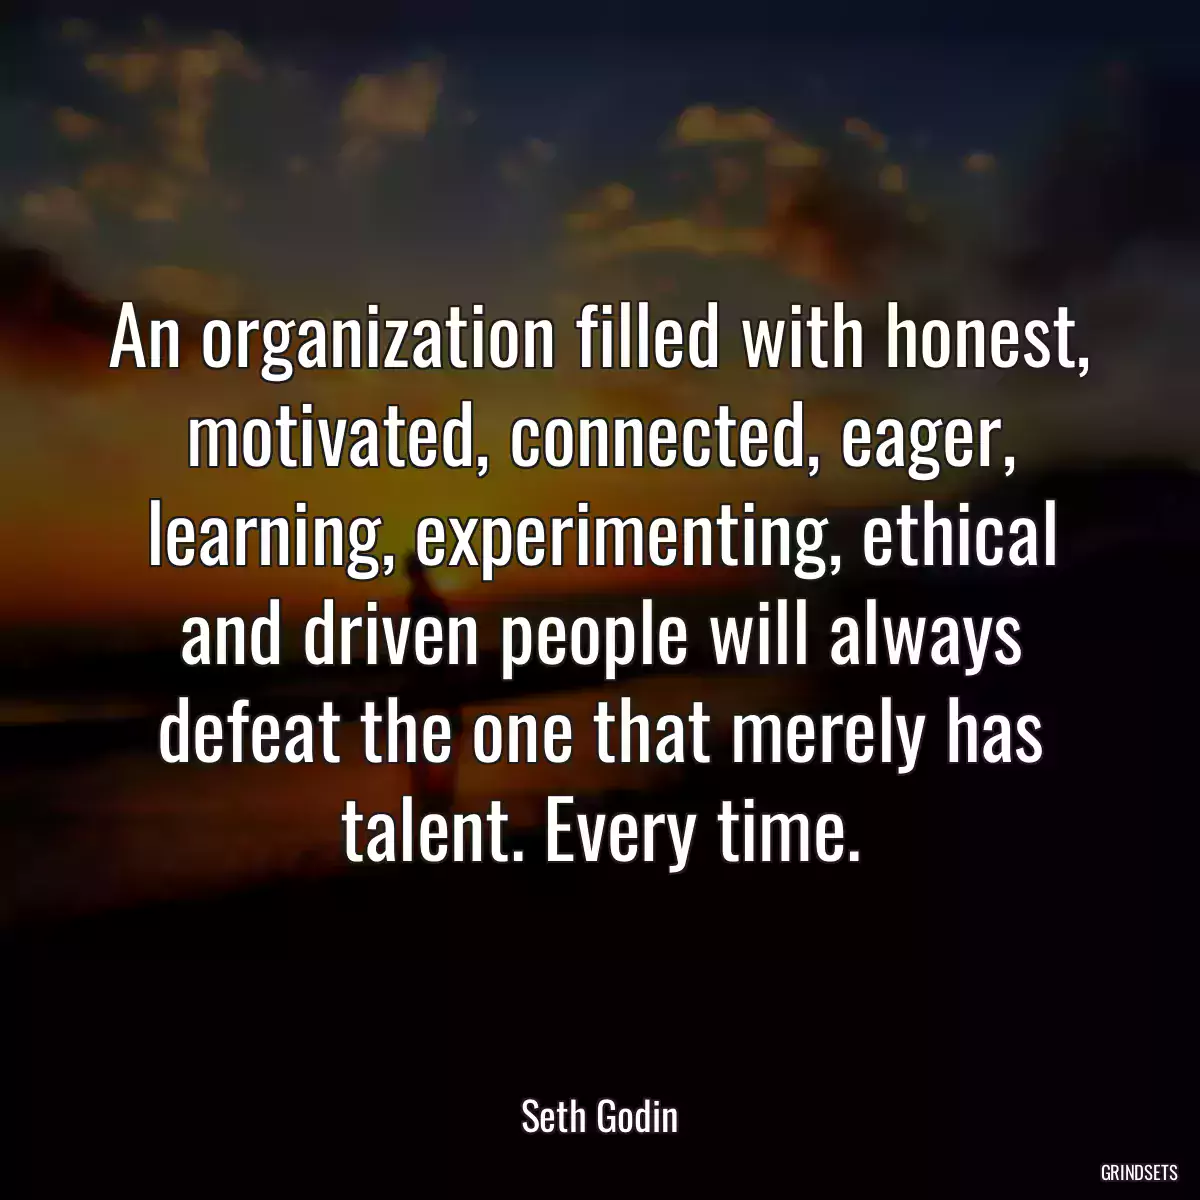 An organization filled with honest, motivated, connected, eager, learning, experimenting, ethical and driven people will always defeat the one that merely has talent. Every time.